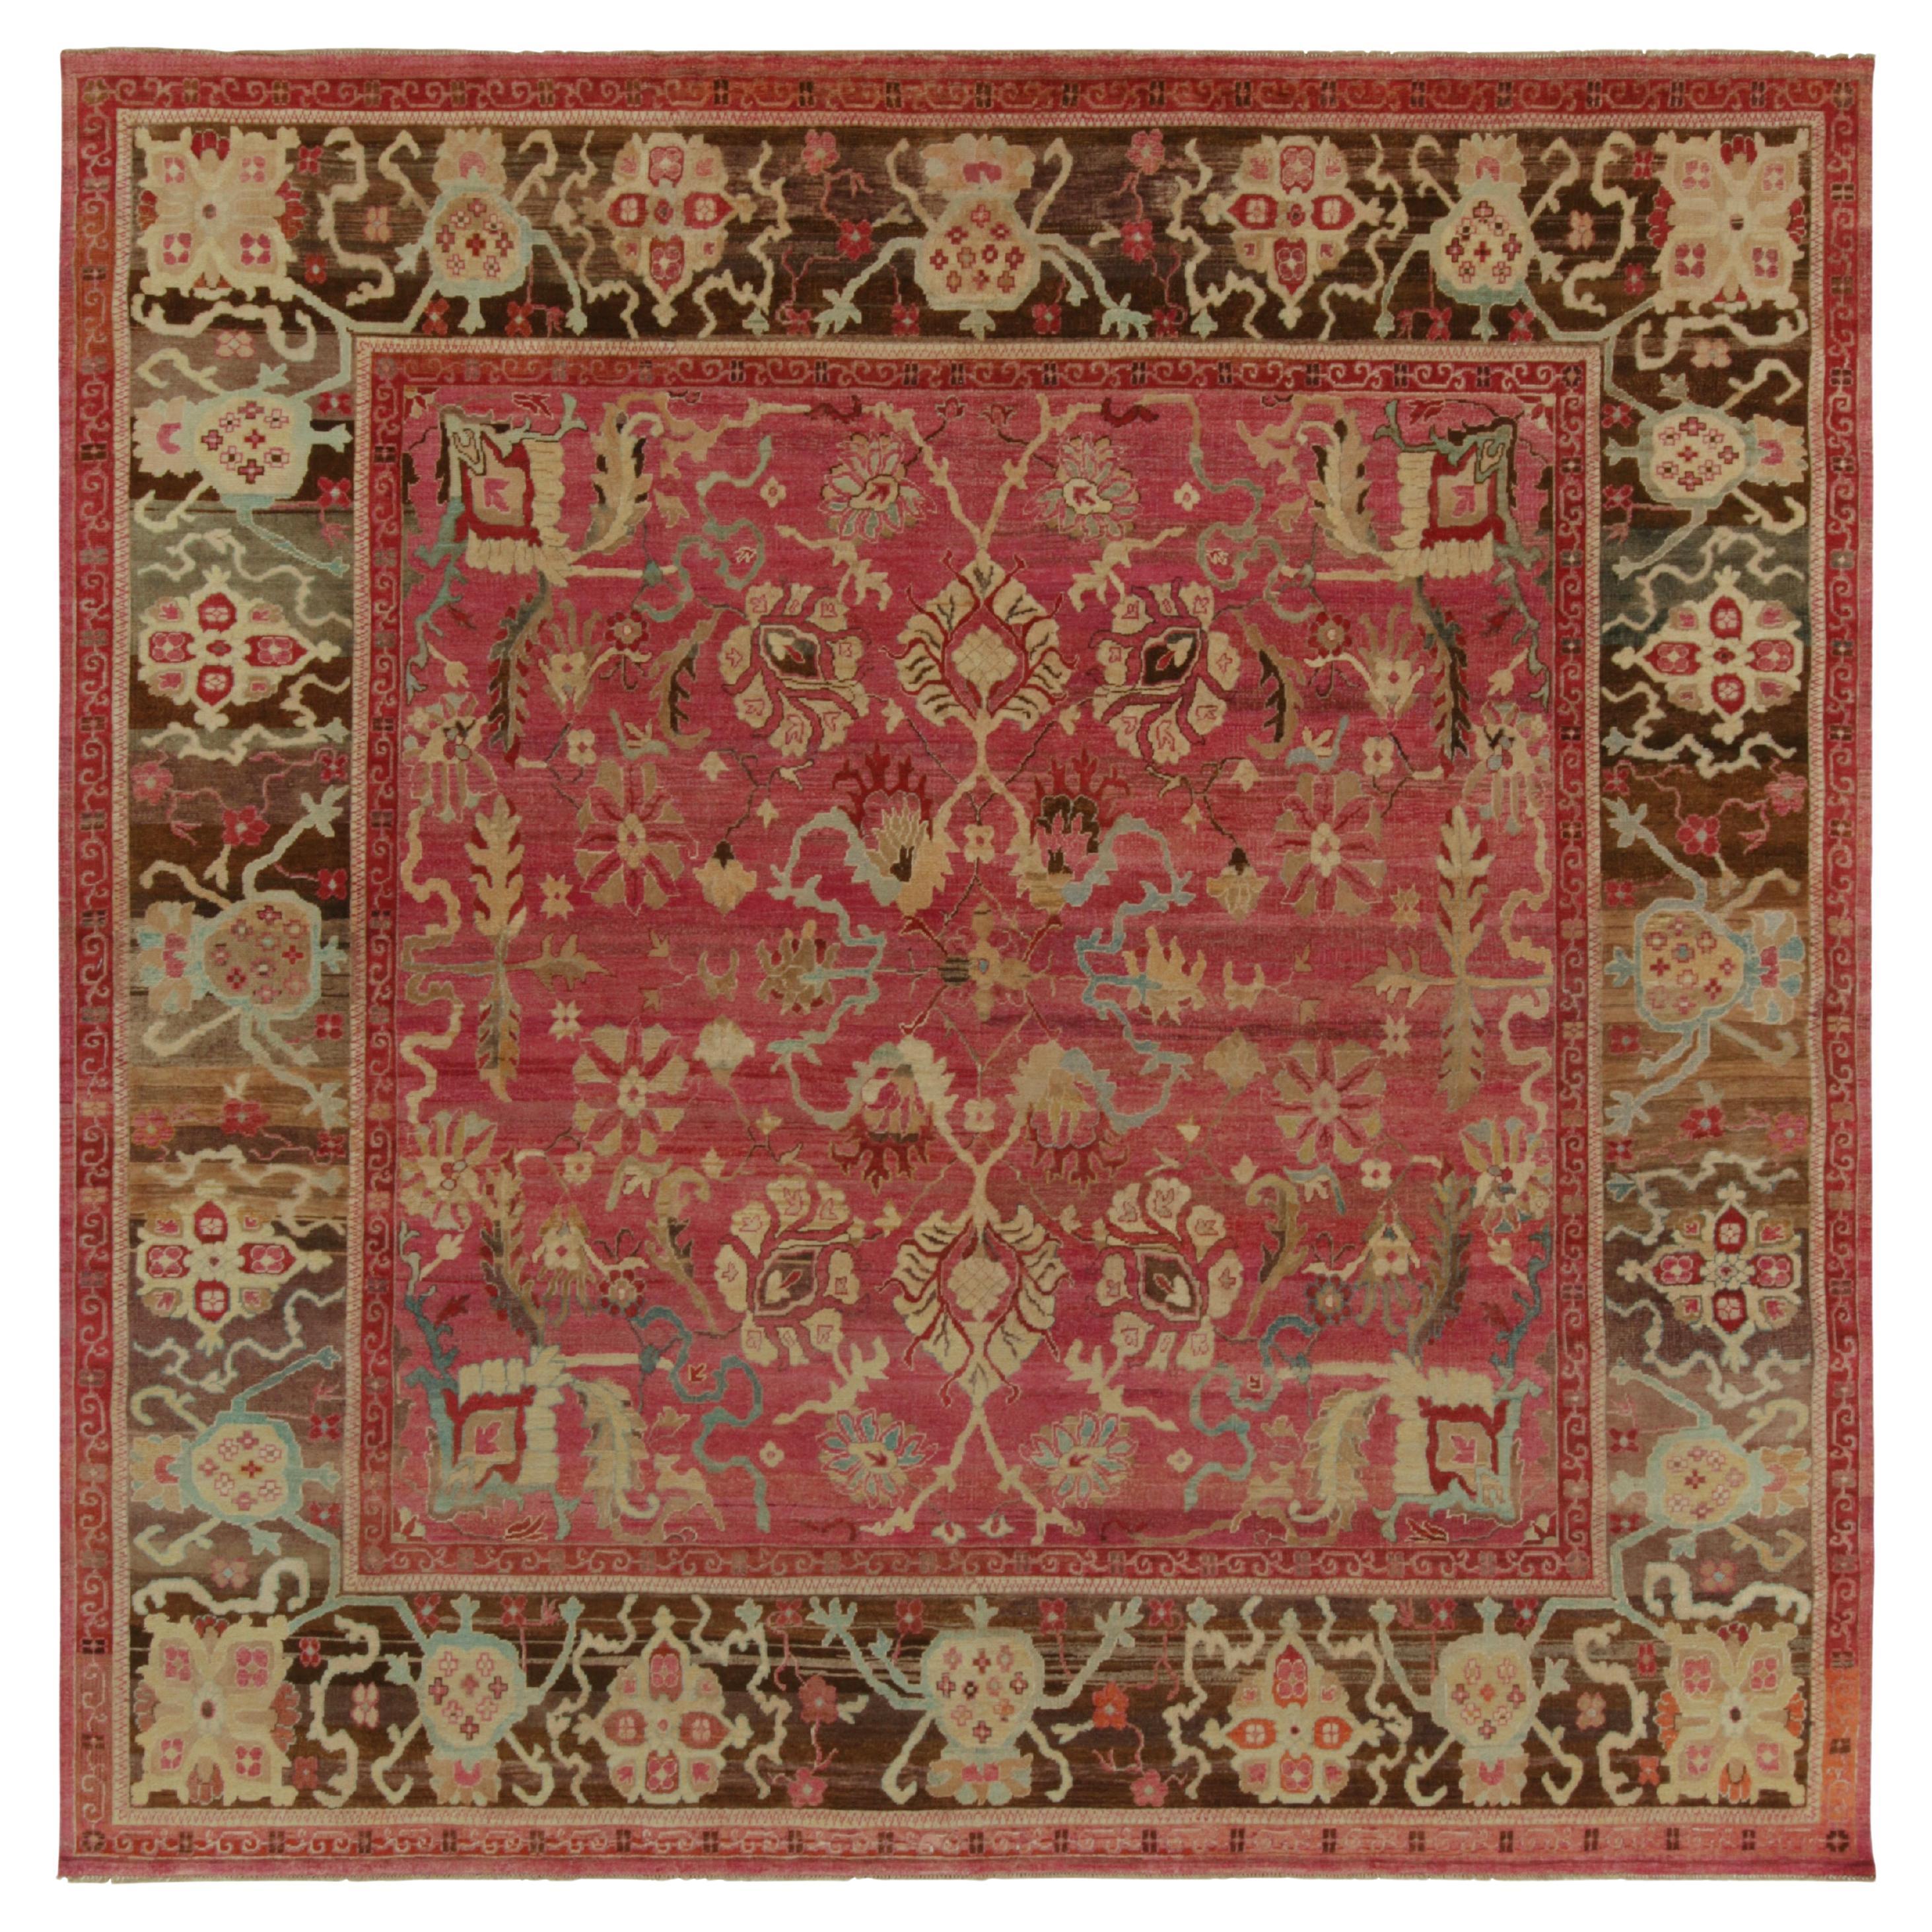 Rug & Kilim’s Classic Style Square Rug in Pink, Red and Beige-Brown Florals For Sale